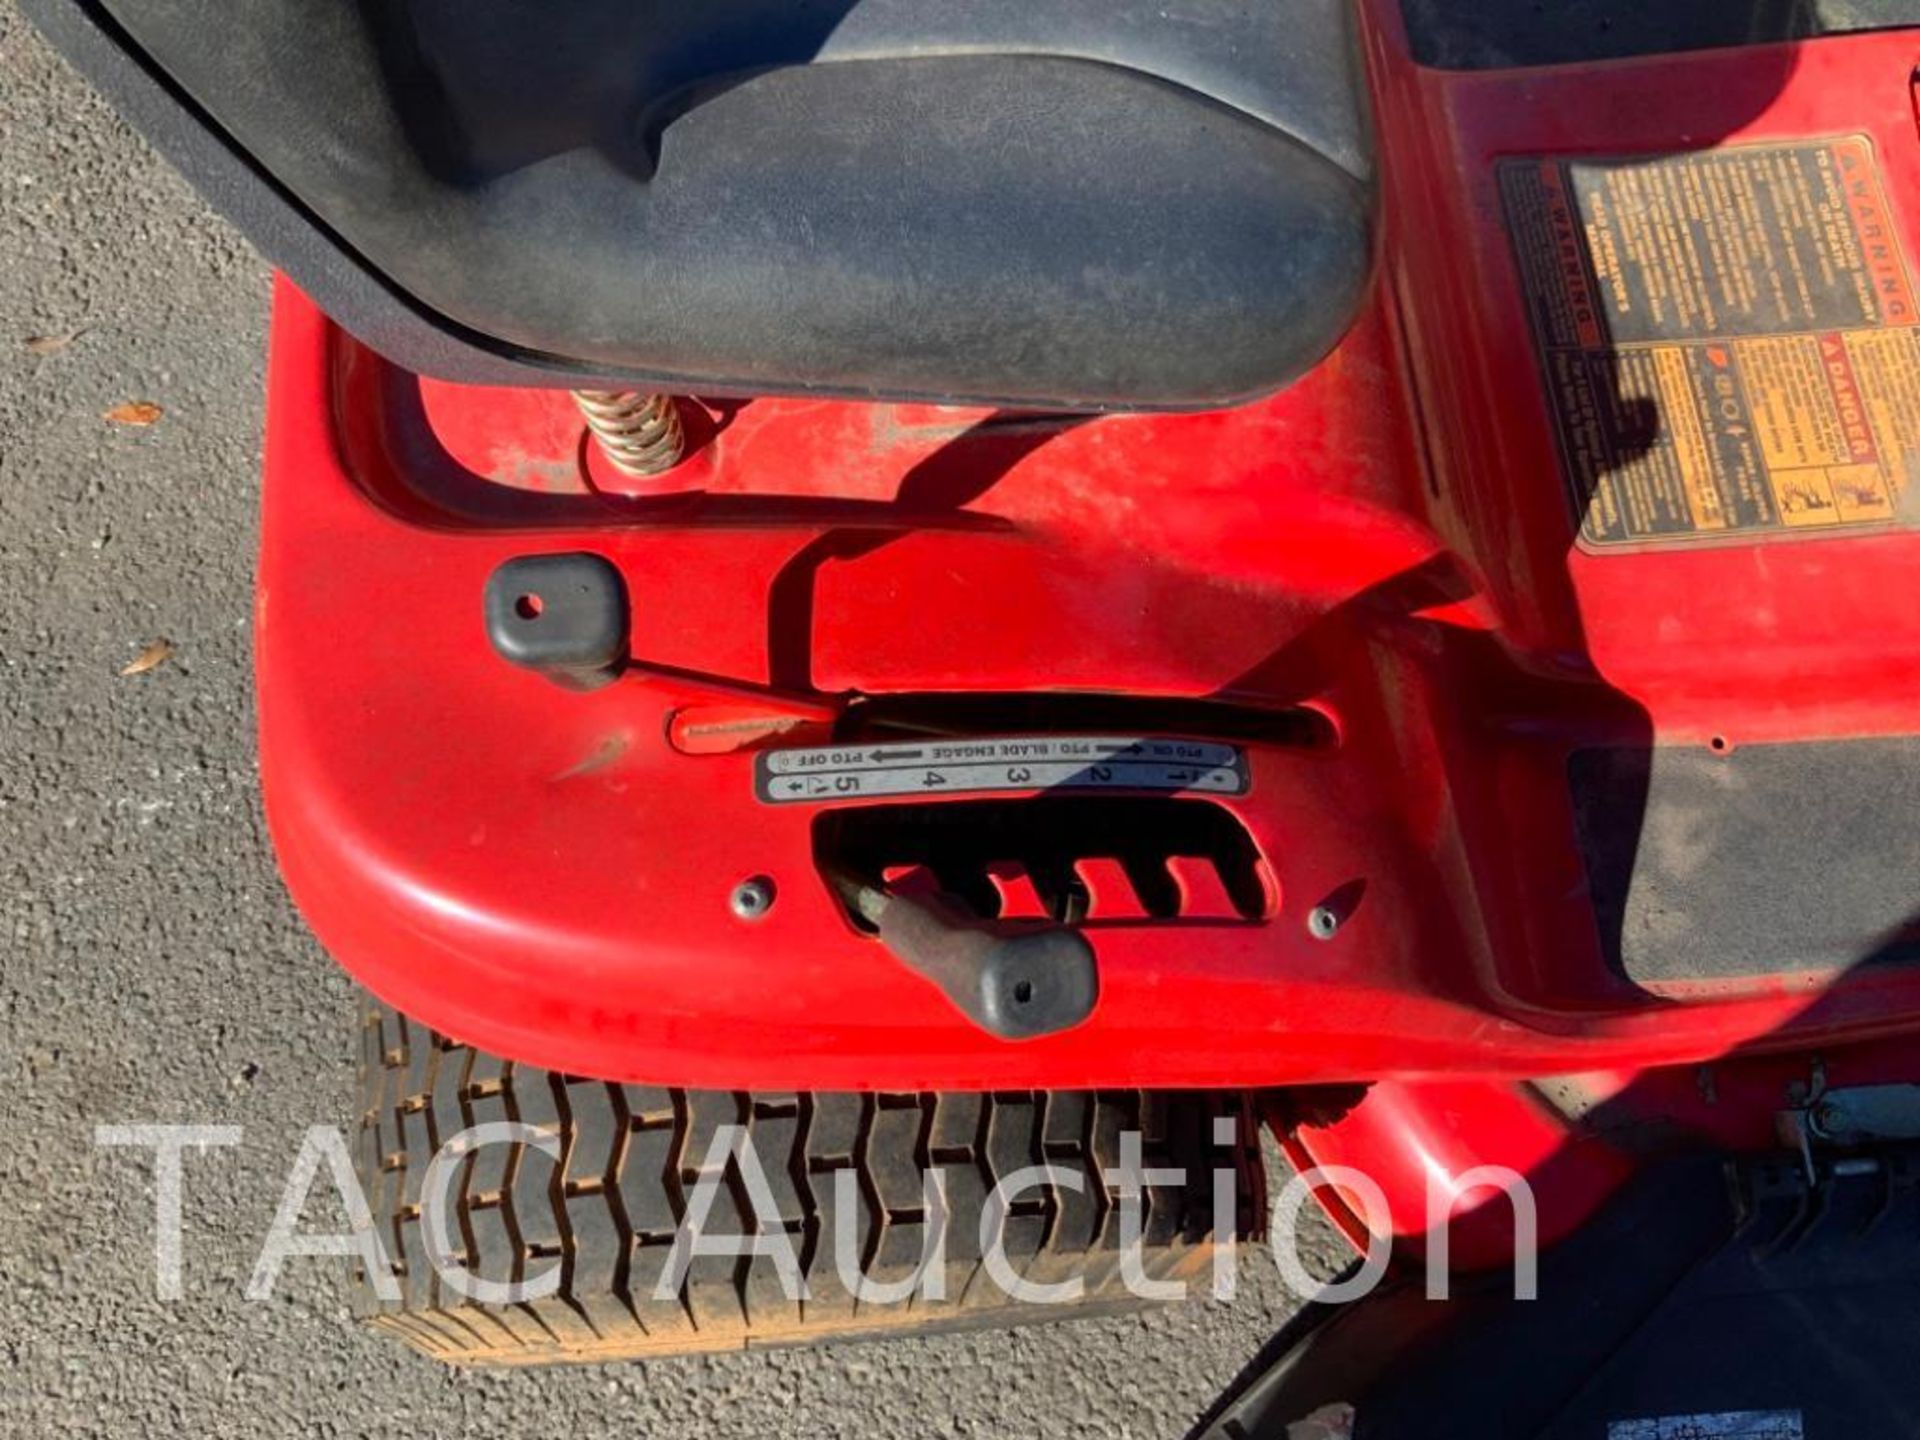 2011 Troy-Bilt Pony 42in Riding Lawn Mower - Image 9 of 20